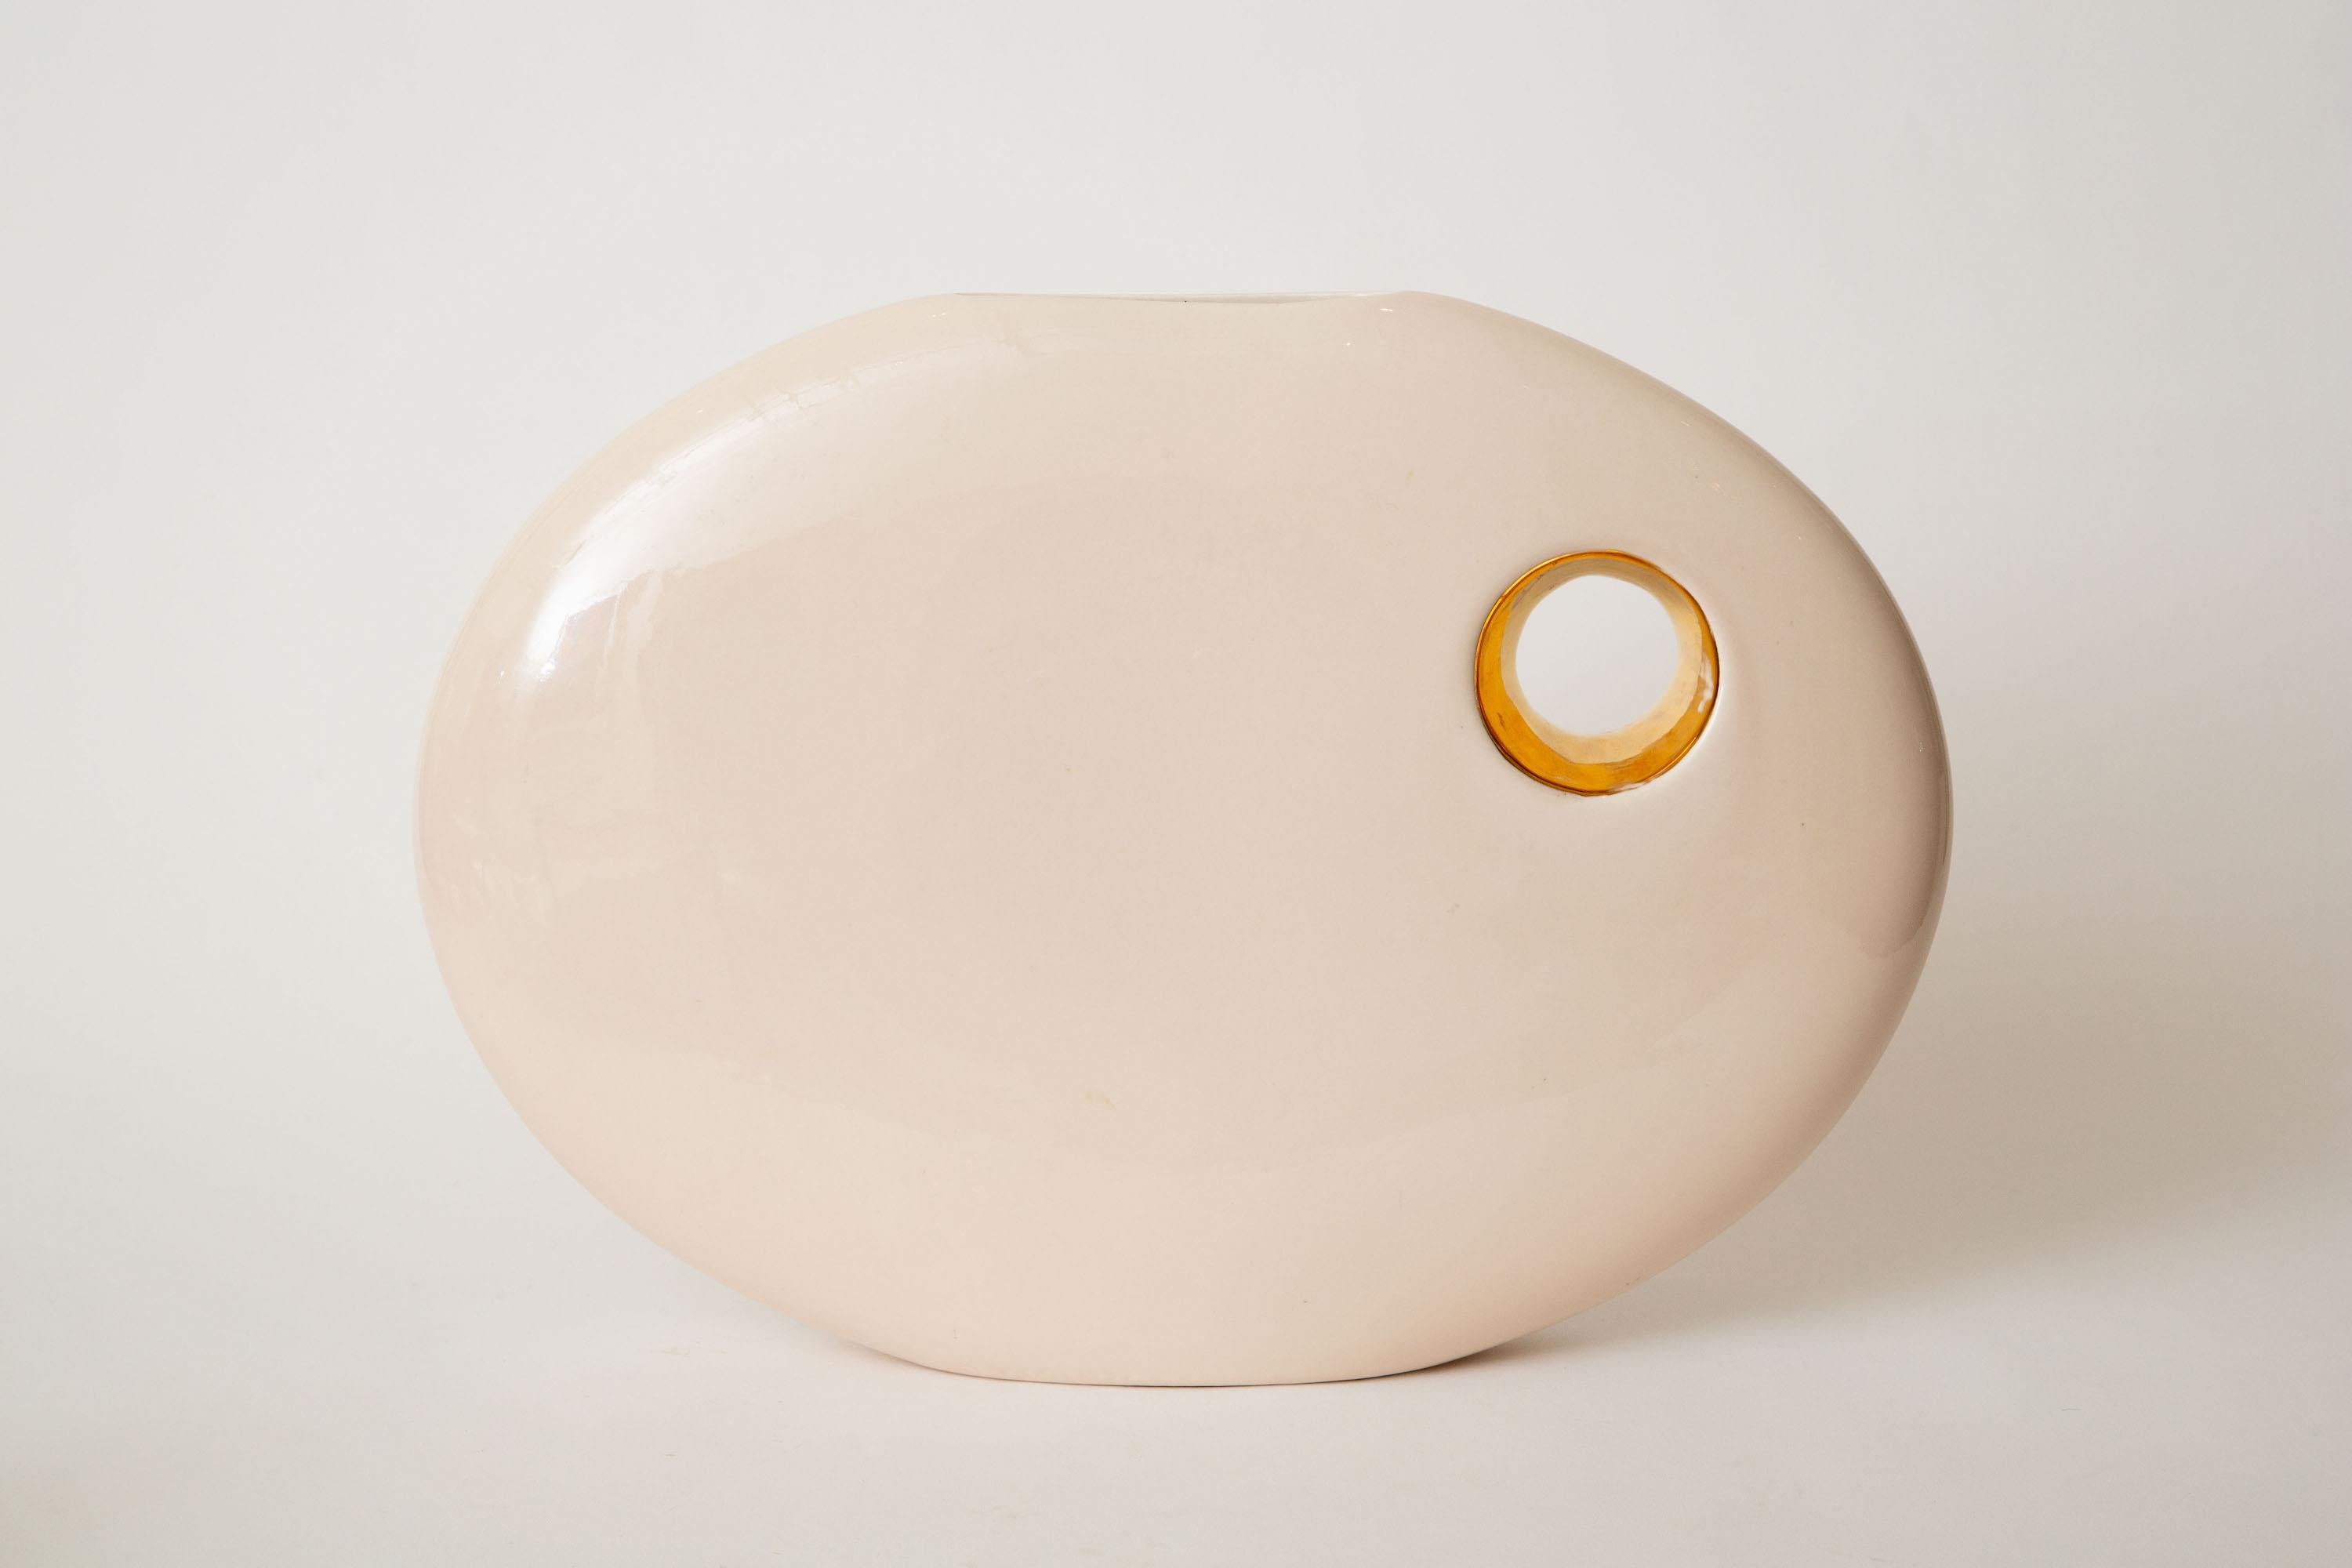 This lovely elongated signed Jaru ceramic sculpture or vessel has a hole on the side. It is 24 carat gold plated. It is cream beige with gold. It has a large presence. This is a unique piece and one that is not on the market readily. Jaru was a